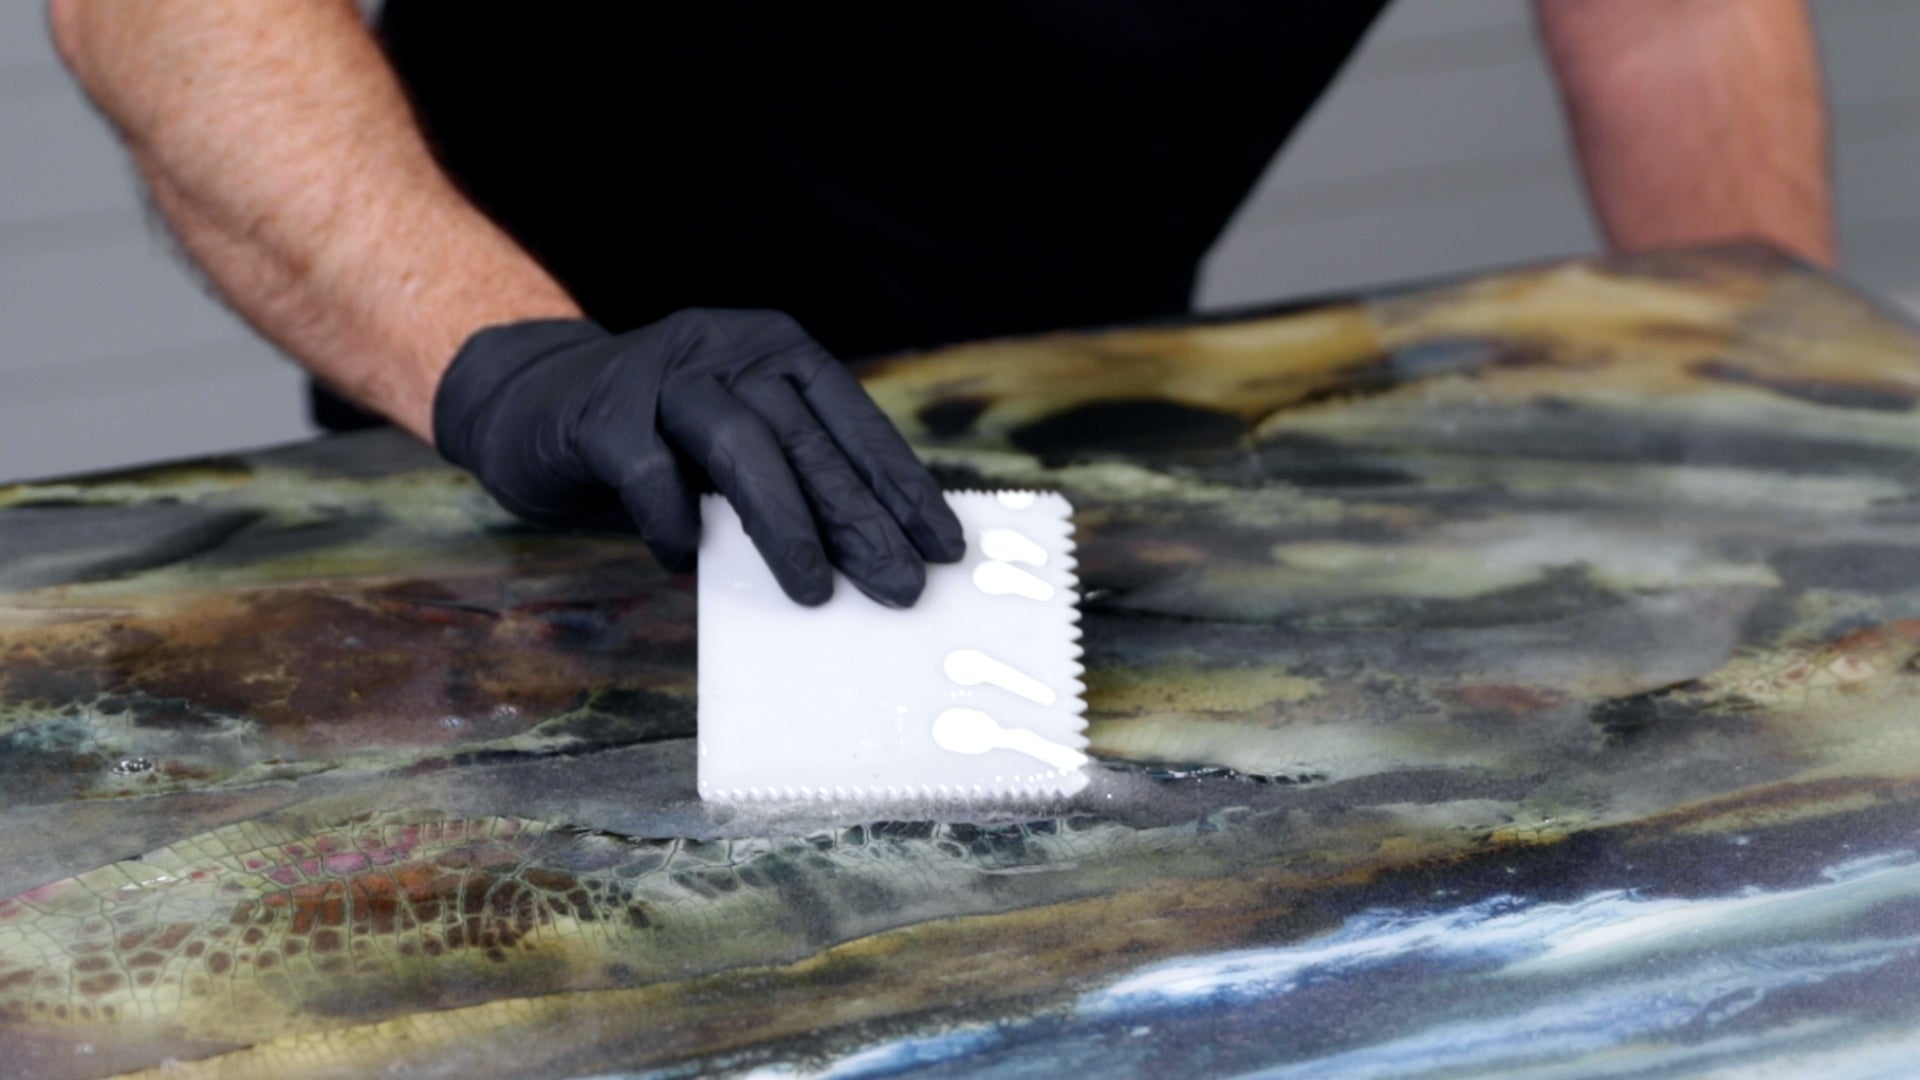 resin a large piece of art - use a spreading tool to apply resin quickly